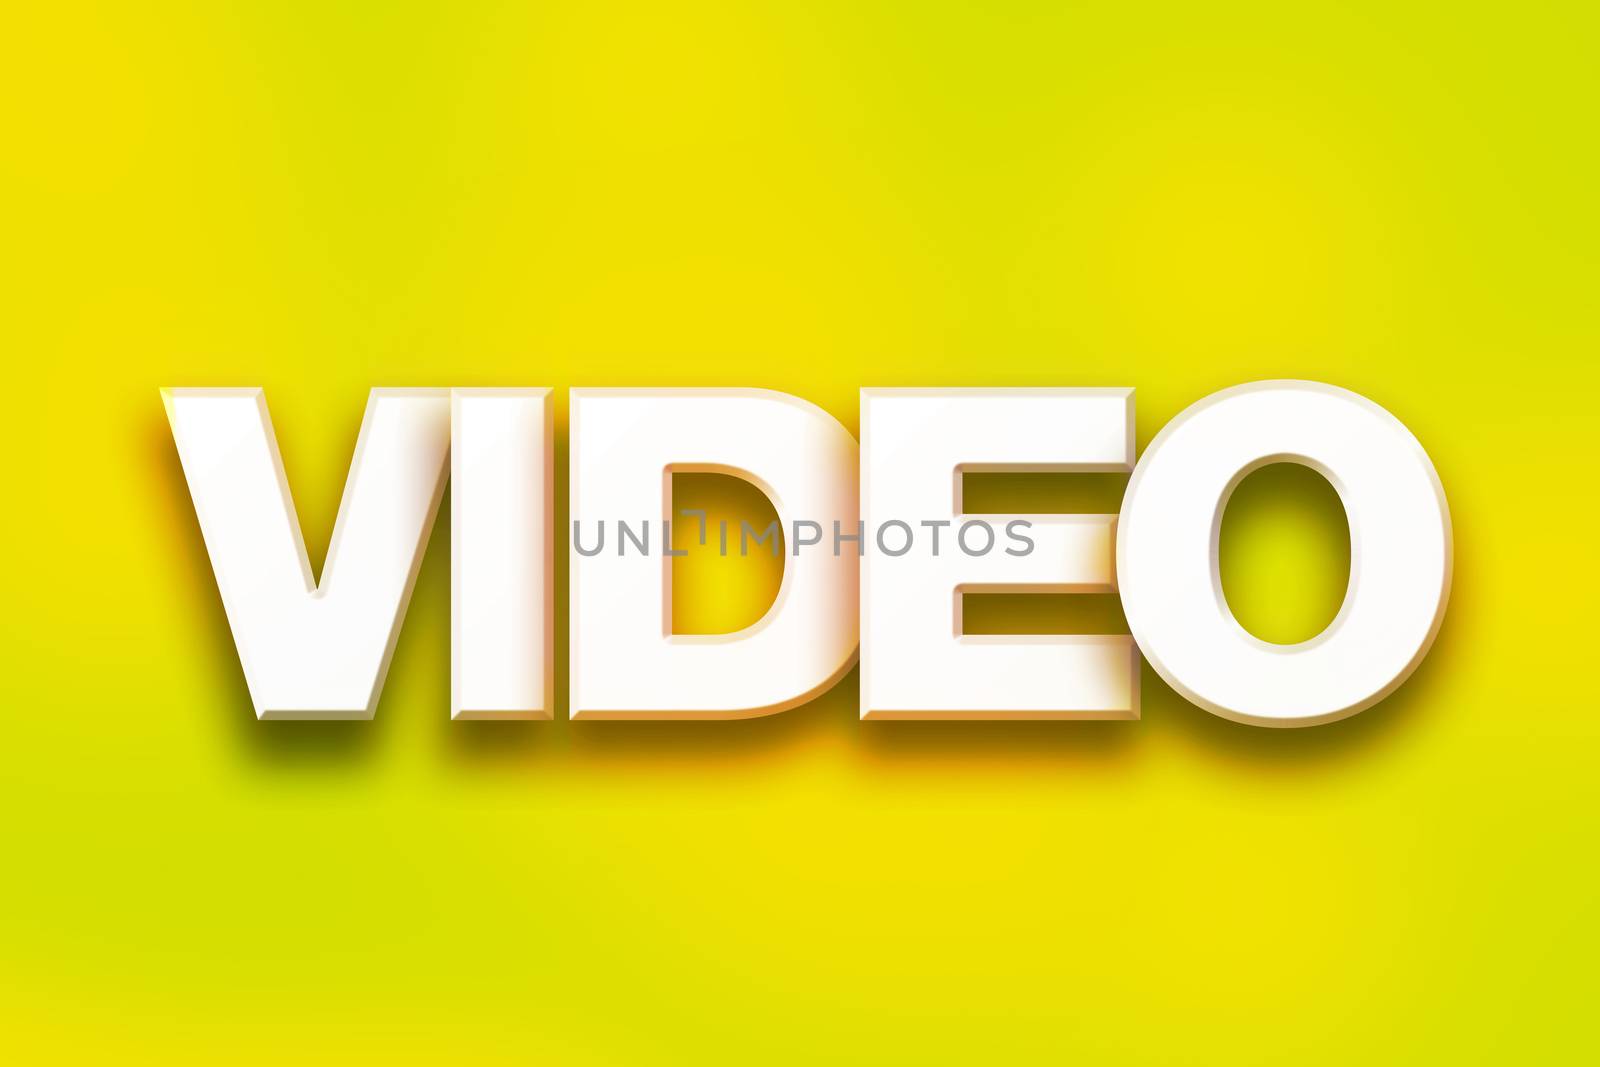 The word "Video" written in white 3D letters on a colorful background concept and theme.